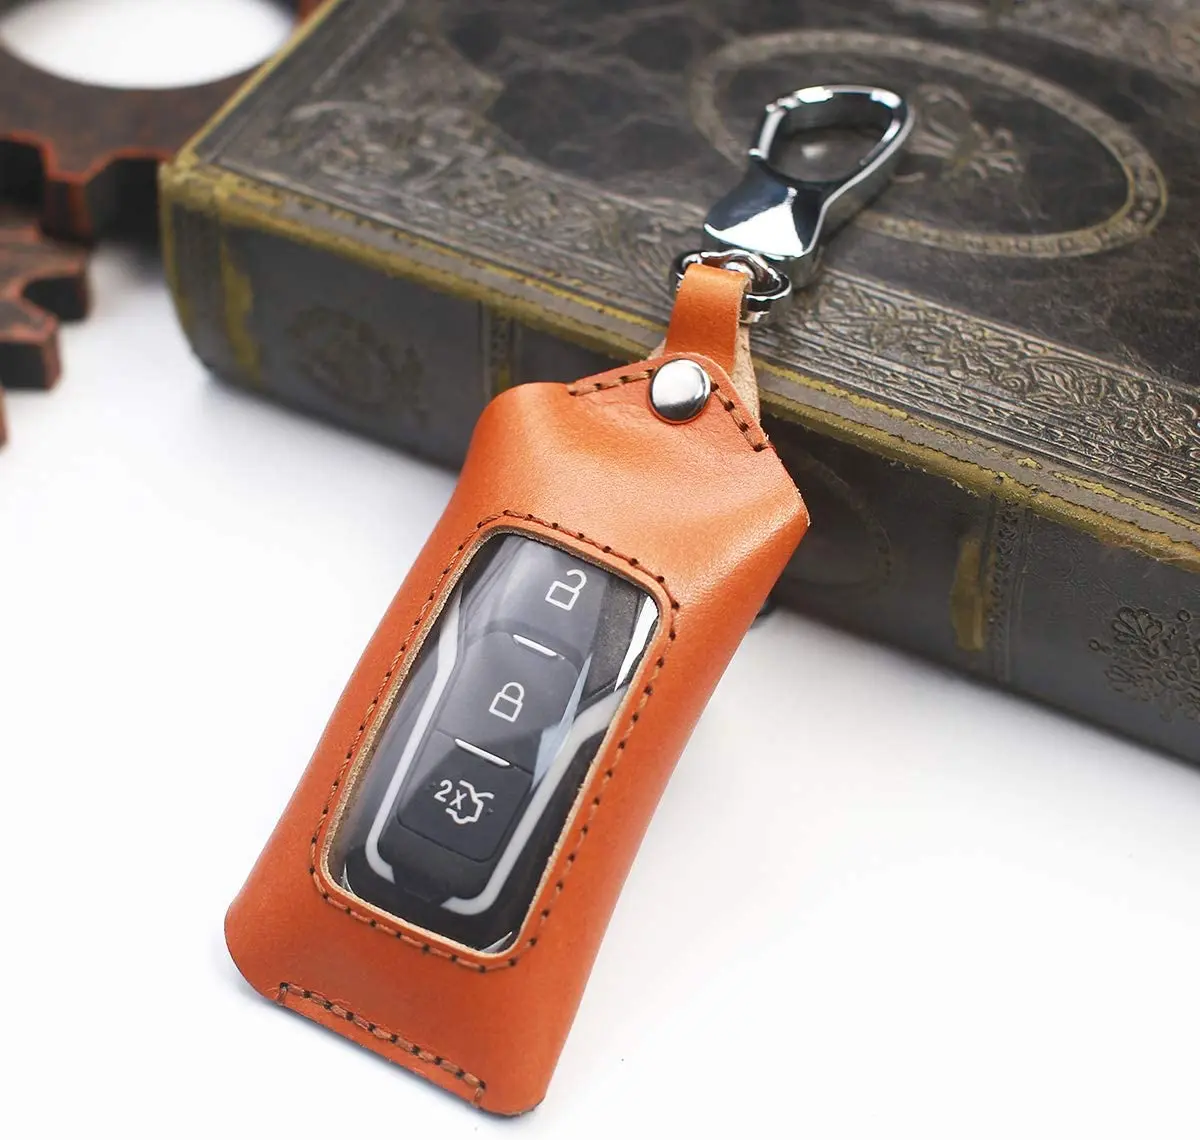 Easyant universal leather key chain protective cover with transparent windows car key bag hook key chain Brown new usb audio video capture card hdmi to type c usb video capture with hdmi 4k loopout 3 5mm audio out for windows mac os linux